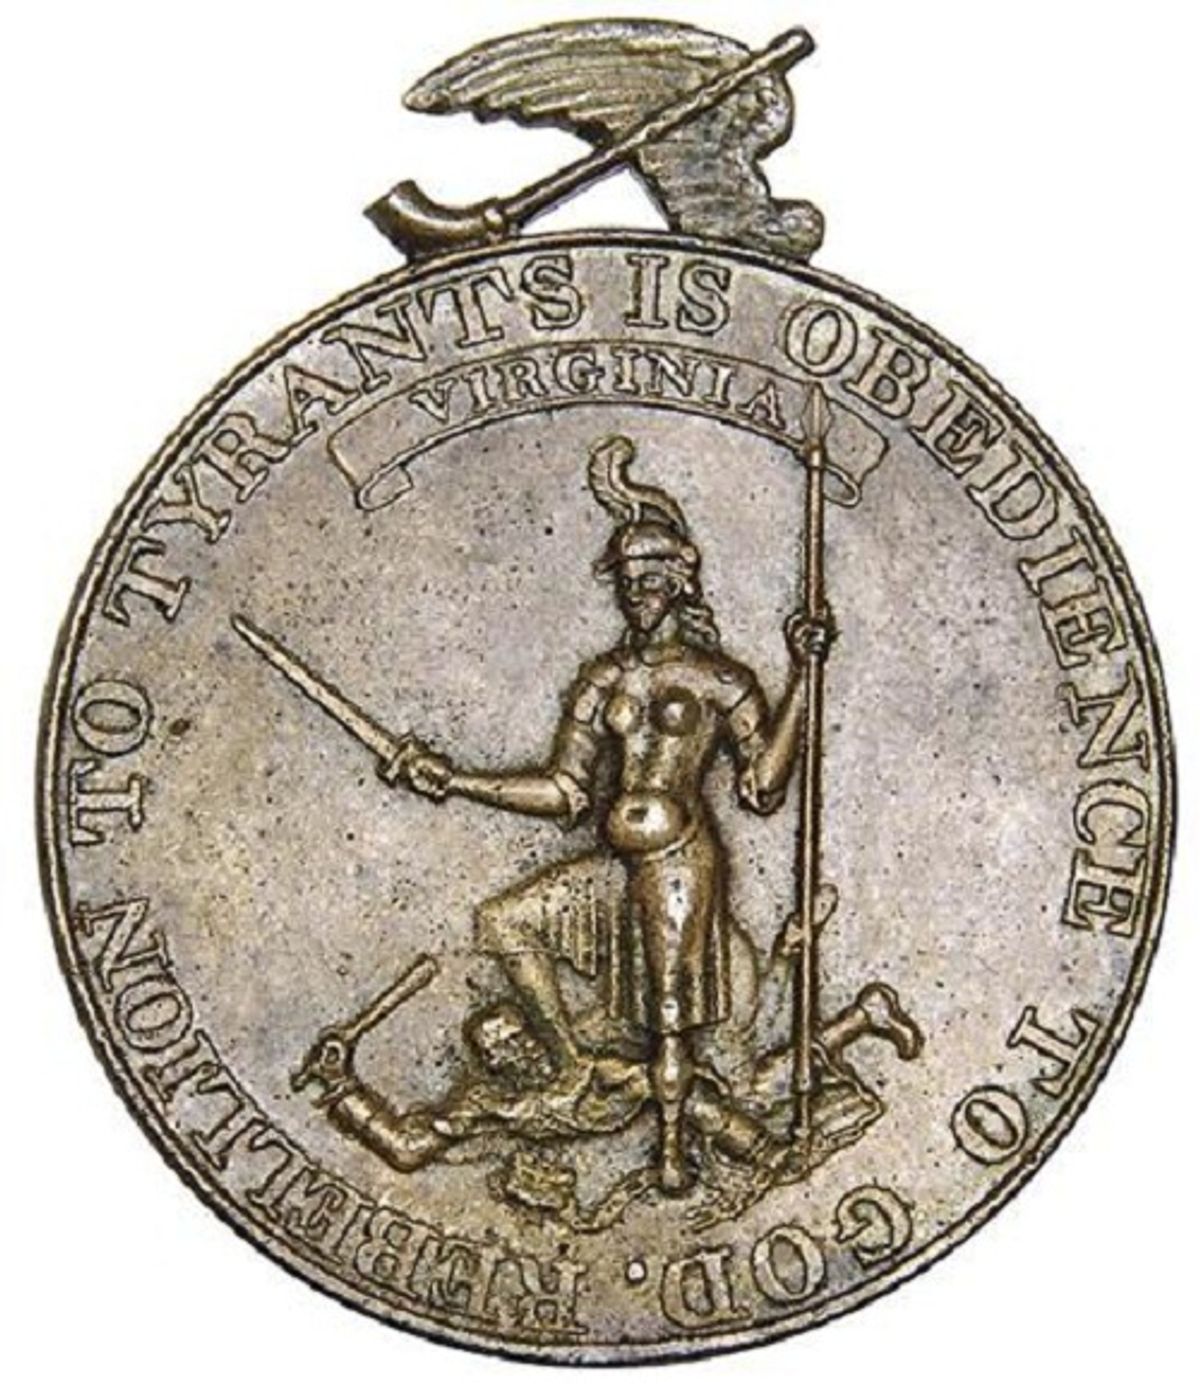 The orginal seal of the state of Virginia